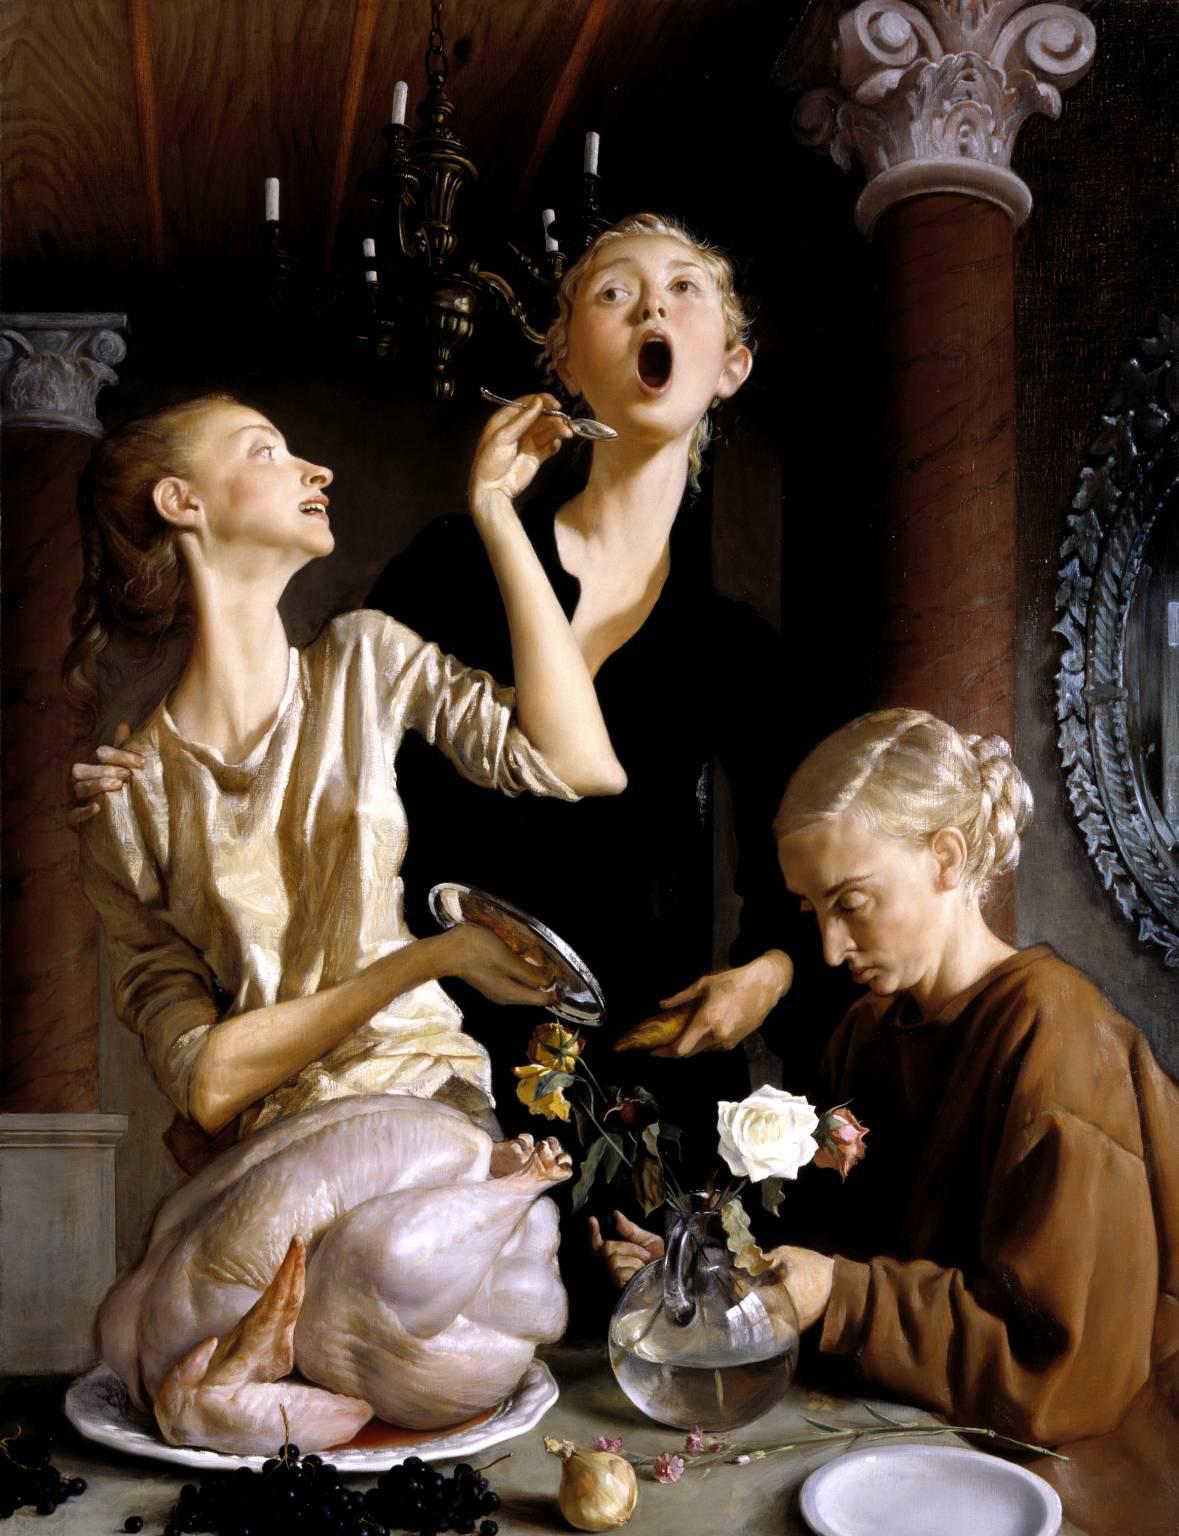 Painting of three women, one feeding another, a turkey sits on the table